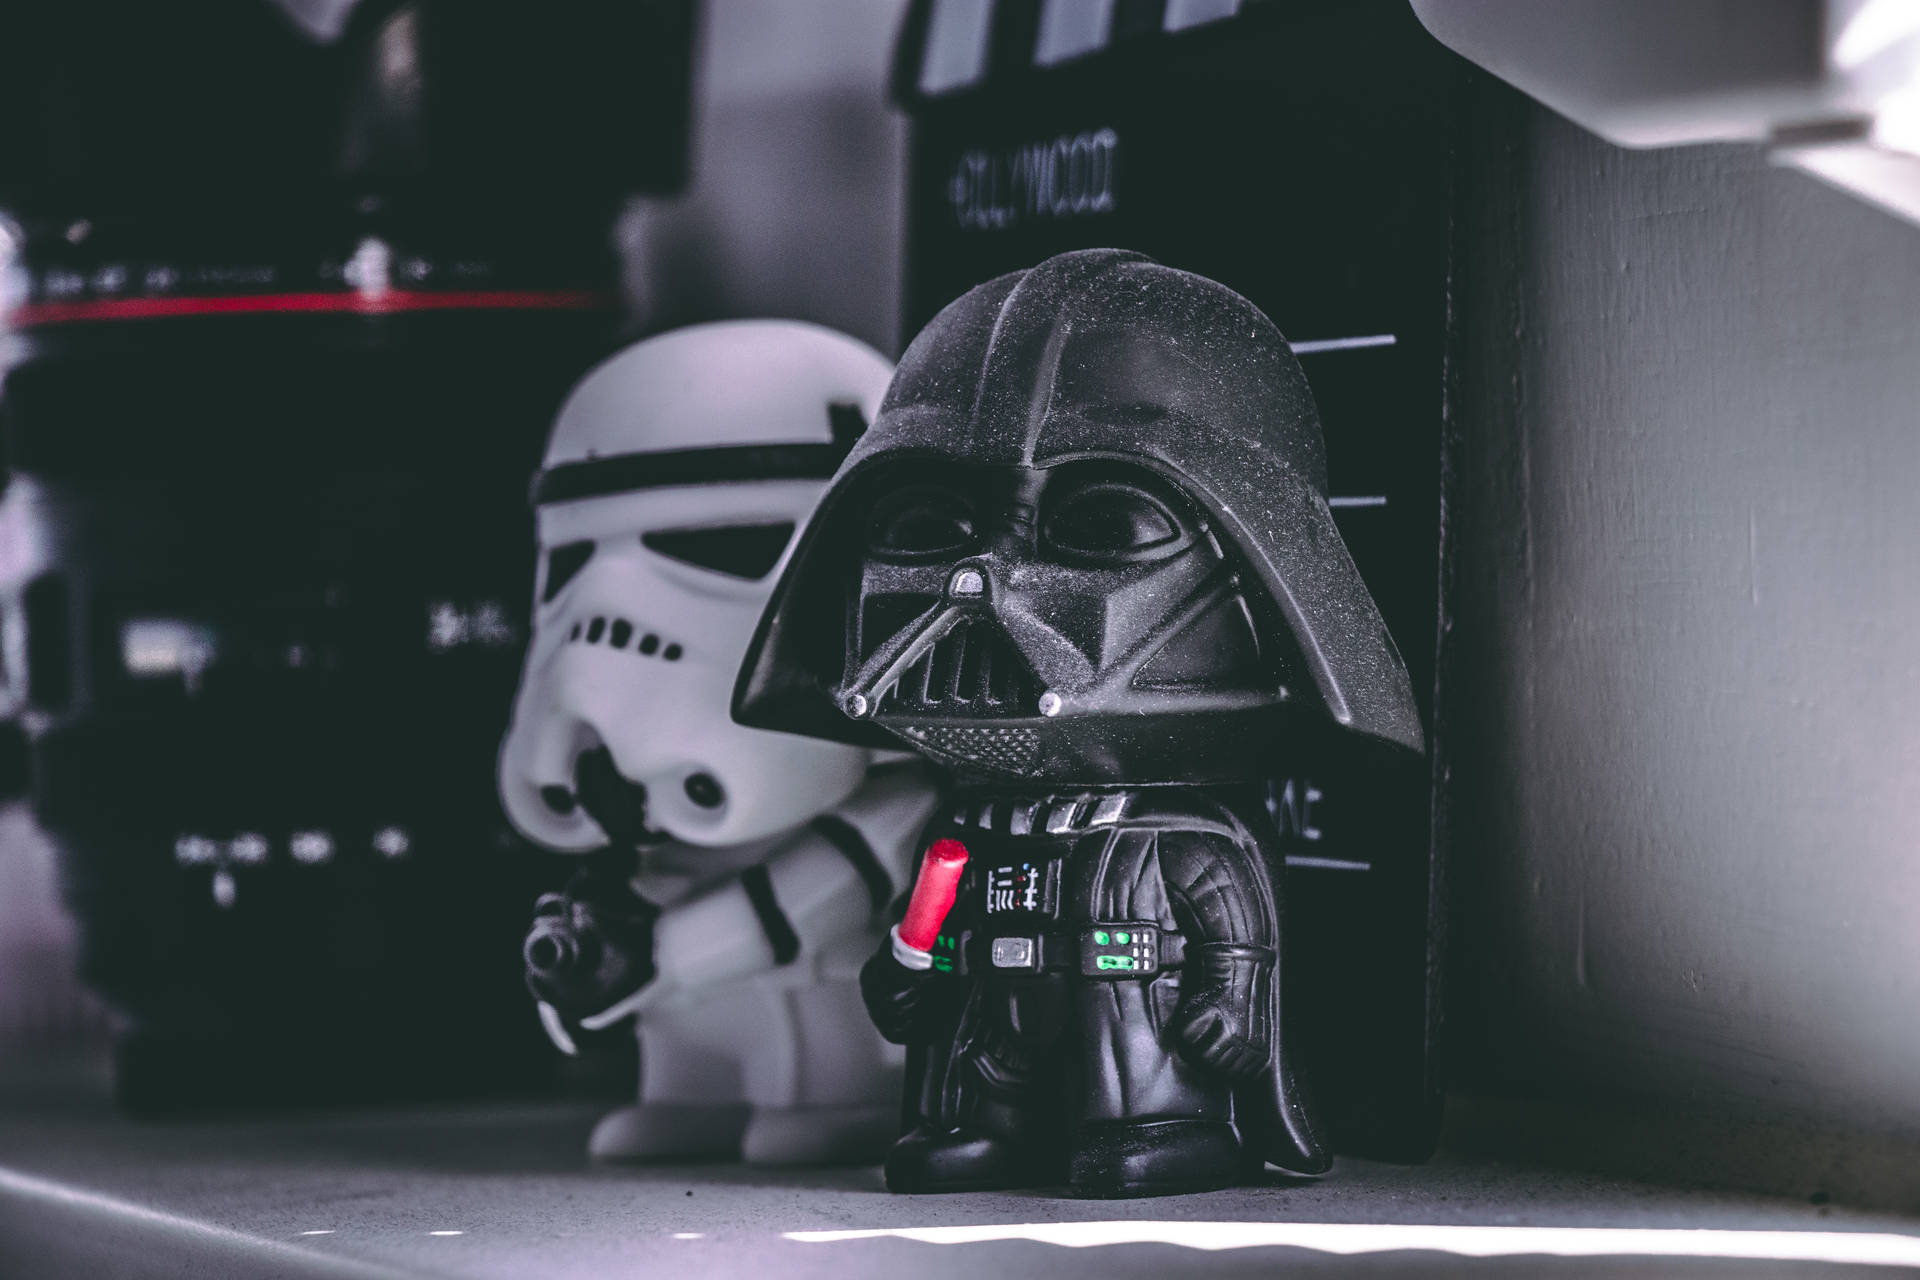 Star Wars Darth Vader And Imperial Stormtrooper Toy Wallpaper